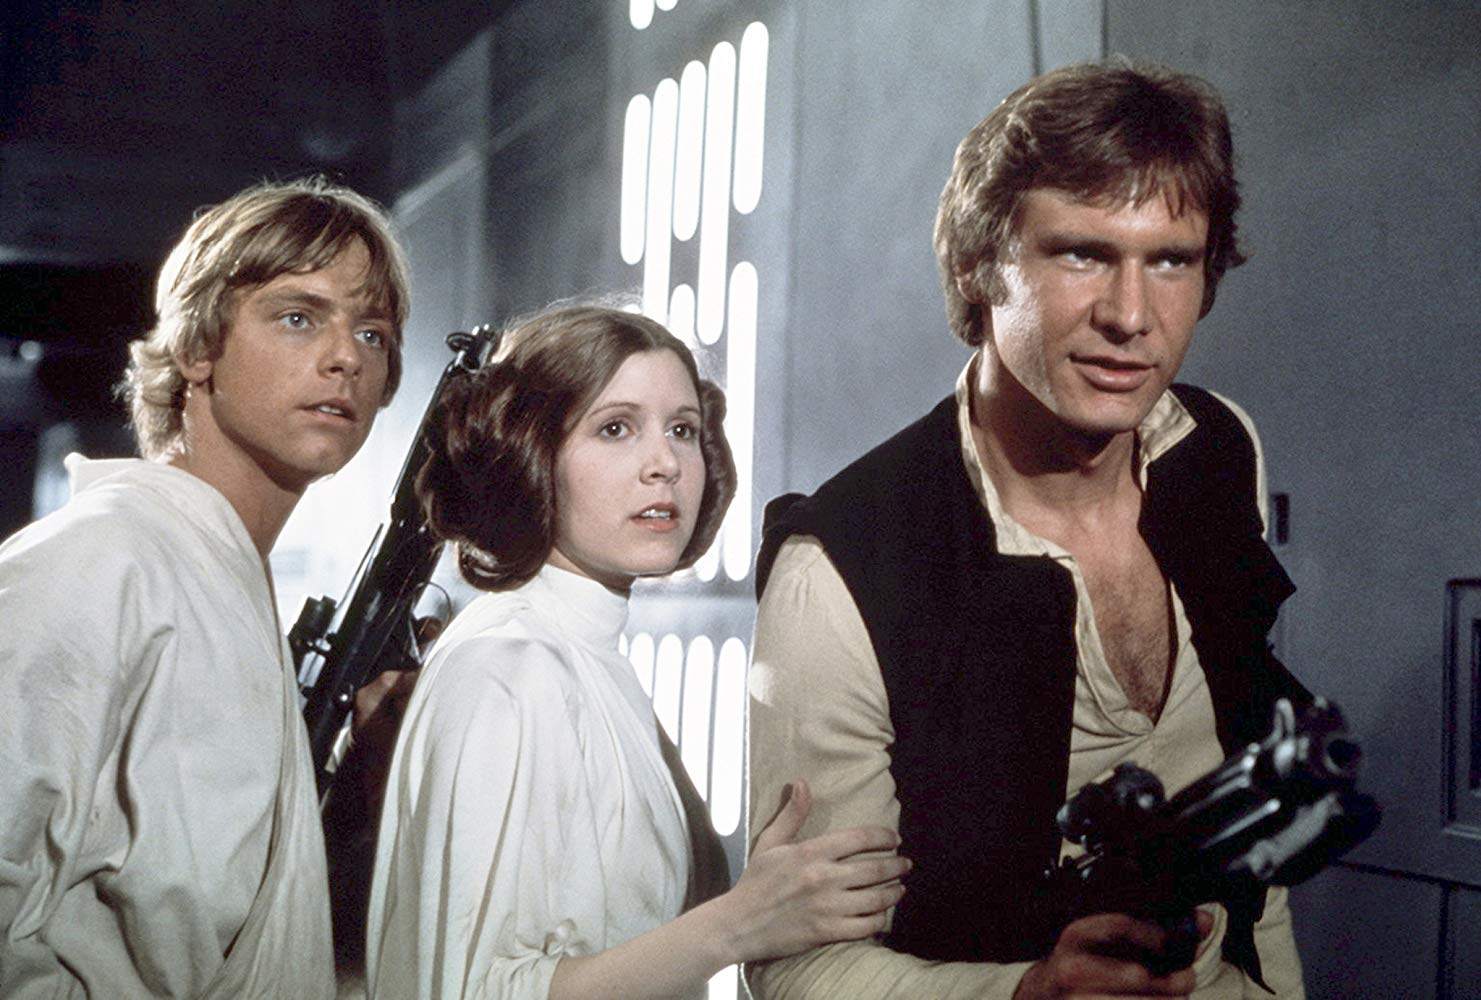 (From left) Mark Hamill, Carrie Fisher and Harrison Ford in Star Wars (1977). May 4 is Star Wars Day. Photo: 20th Century Fox films